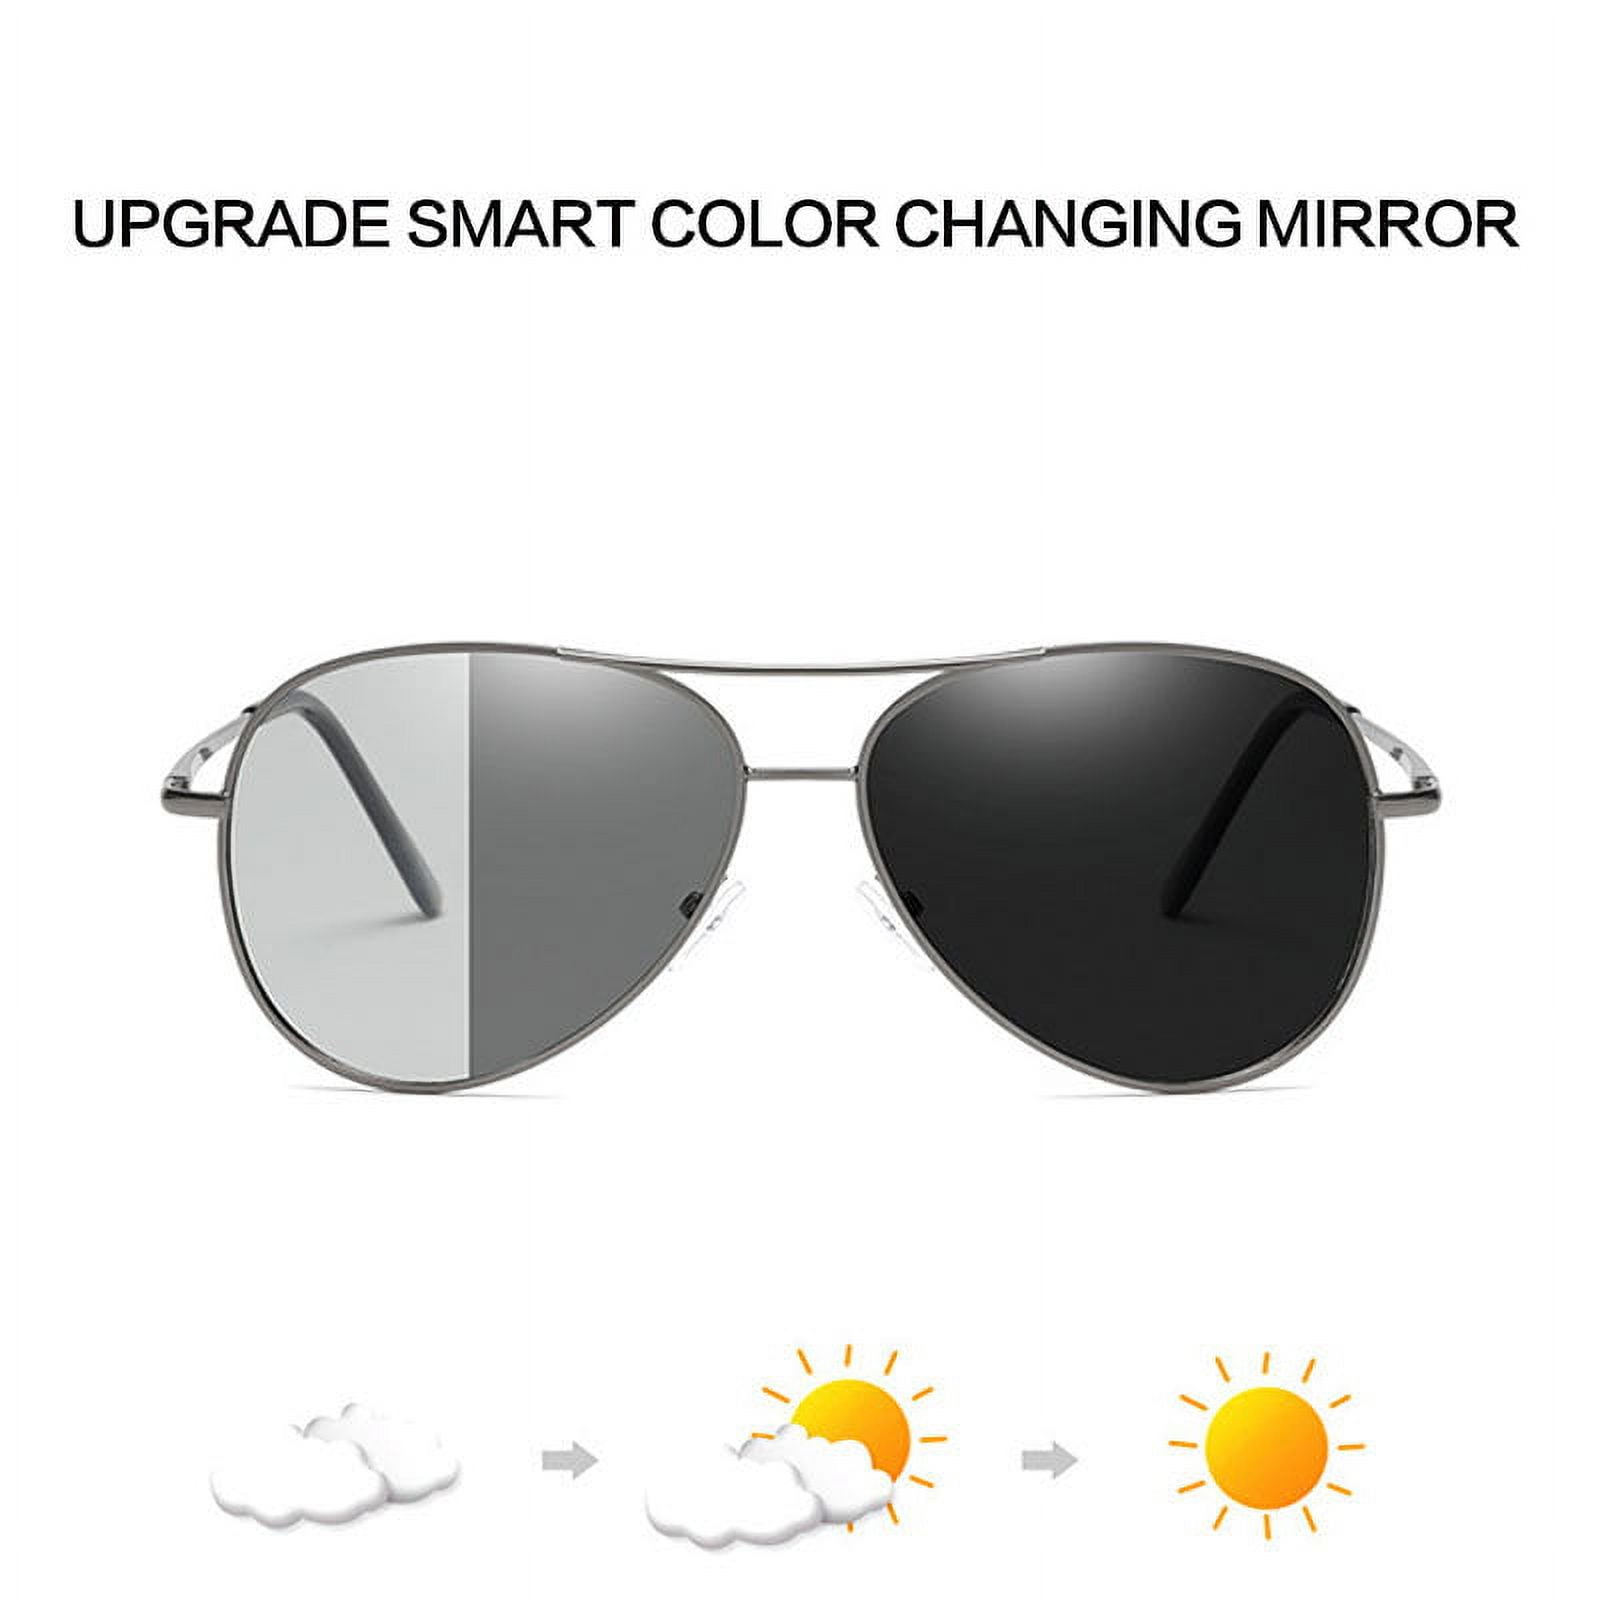 Men's Vintage Polarized Sunglasses Color Changing UV Protection Eyewear for  Driving & Daily Wear Gun Frame Color Change Sheet 